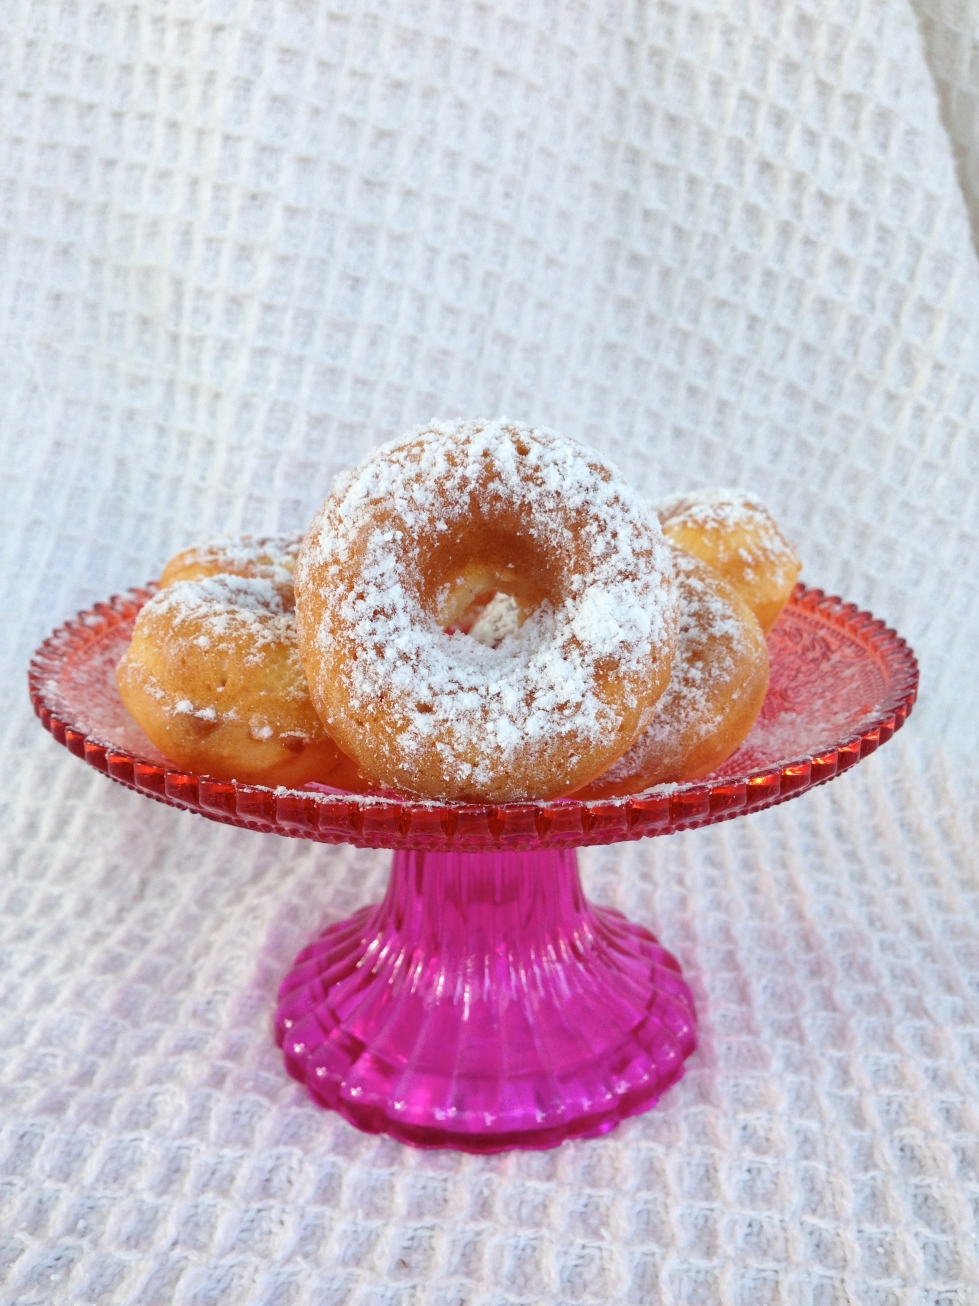 Rum baked donuts / doughnuts with booze | the hungry mum